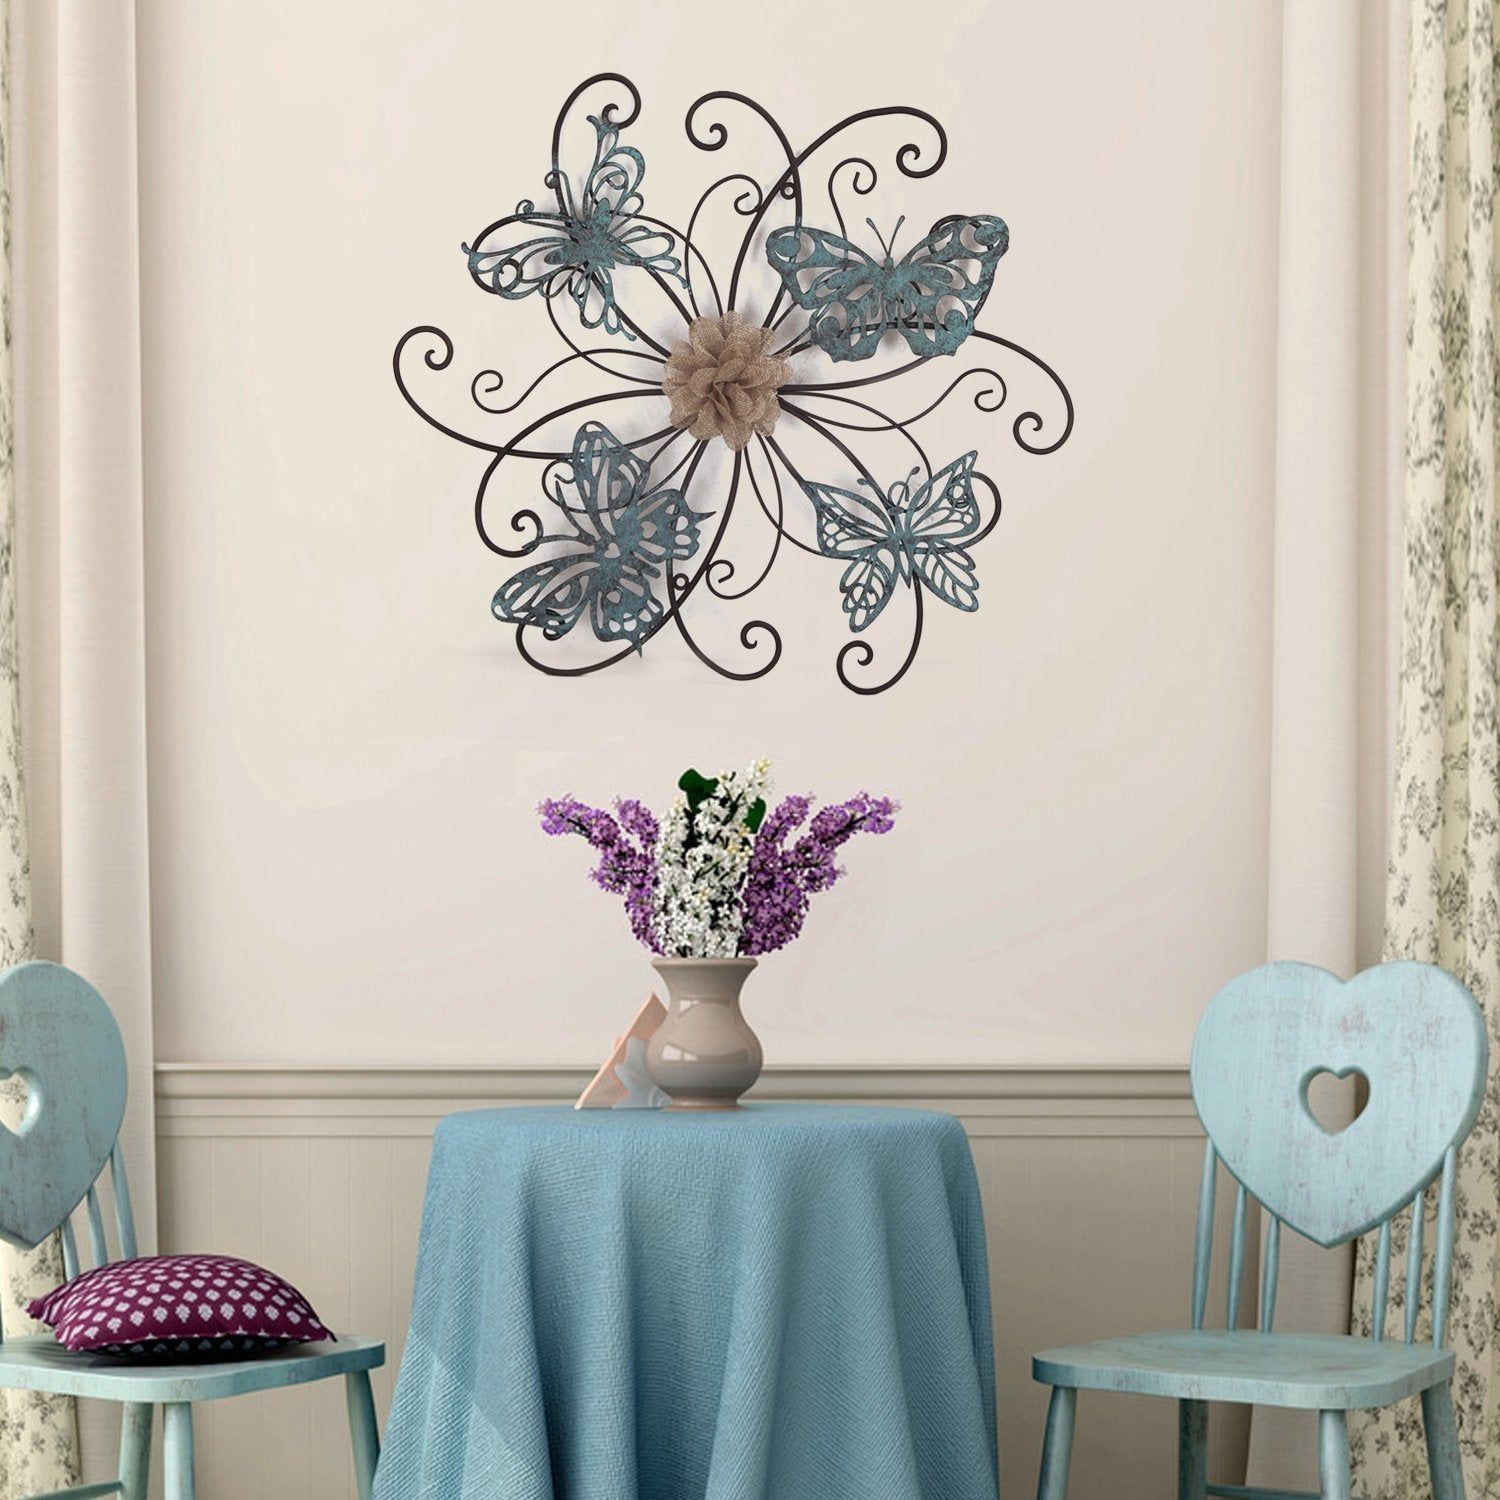 Preferred Shop Adeco Flower And Butterfly Urban Design Metal Wall Decor For For Flower And Butterfly Urban Design Metal Wall Decor (View 6 of 20)